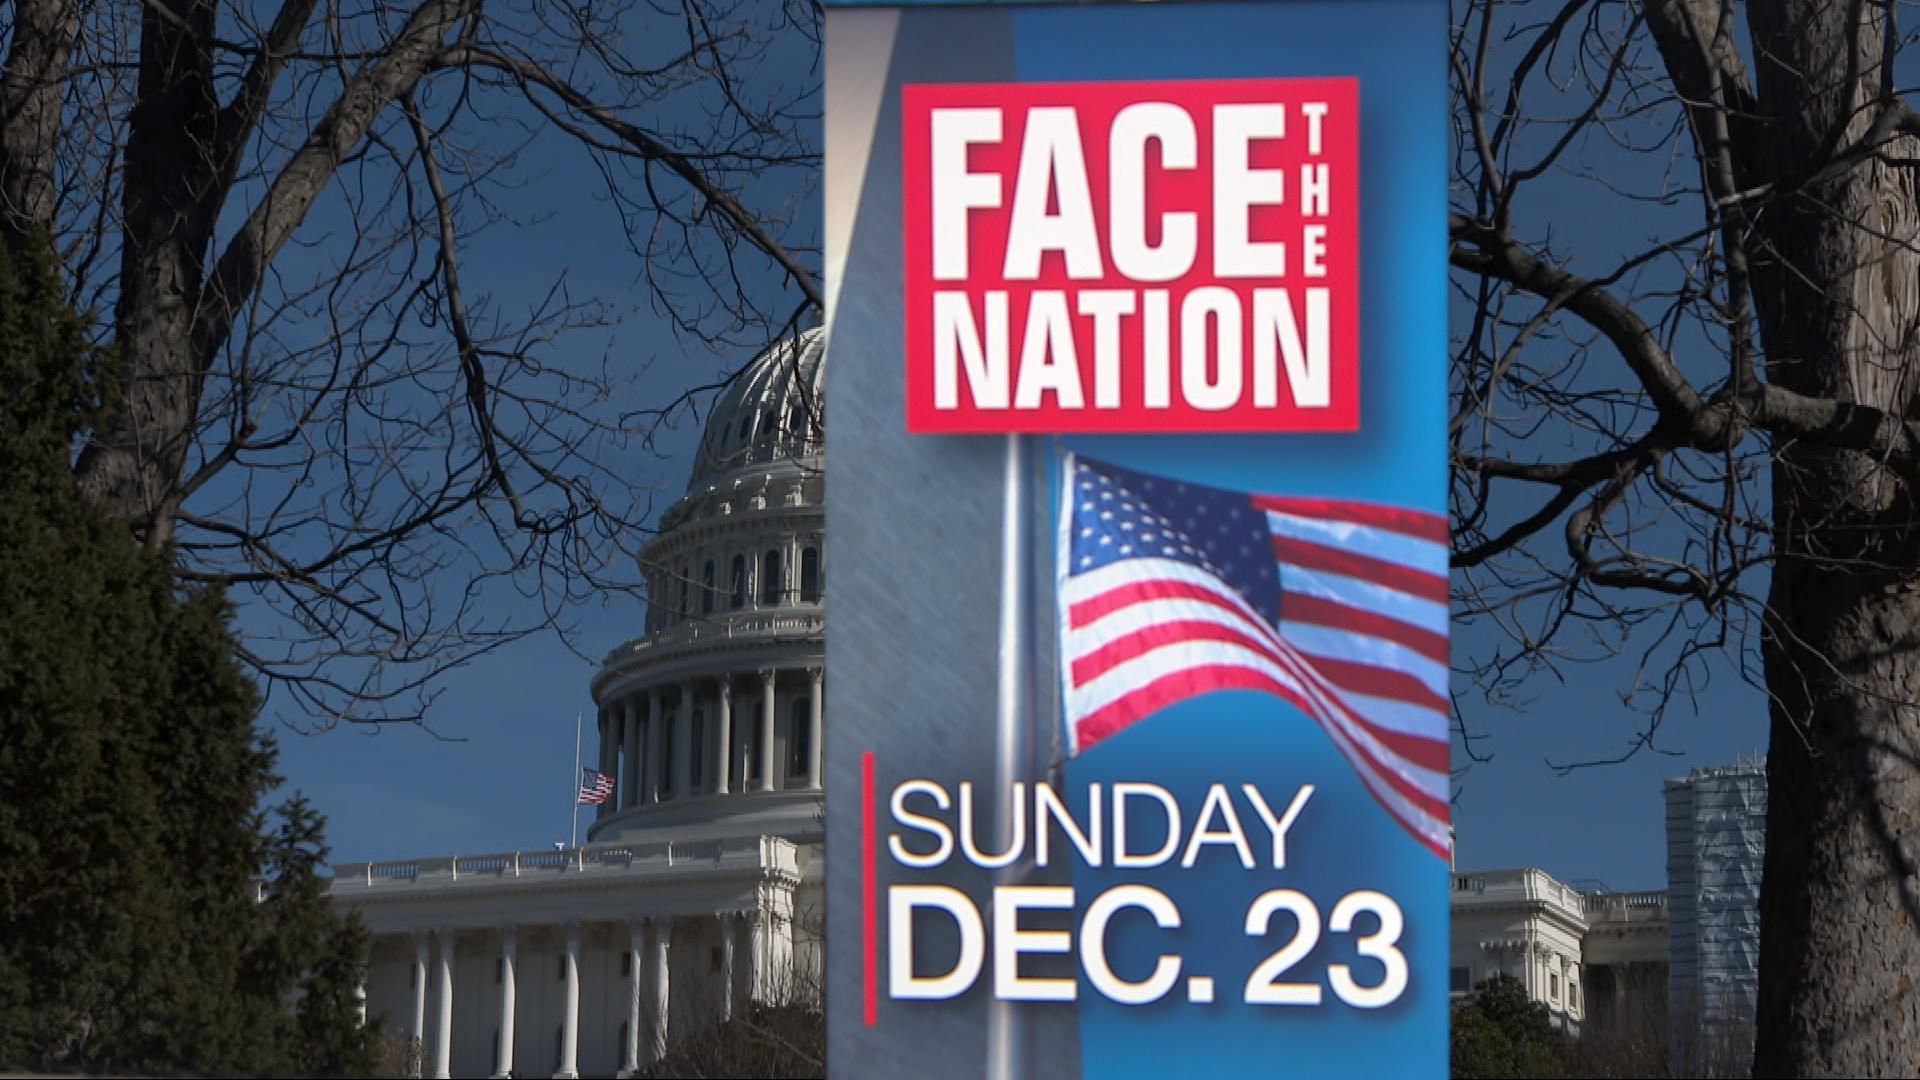 Watch Face The Nation Season 2018 Episode 1223 12/23 Face The Nation